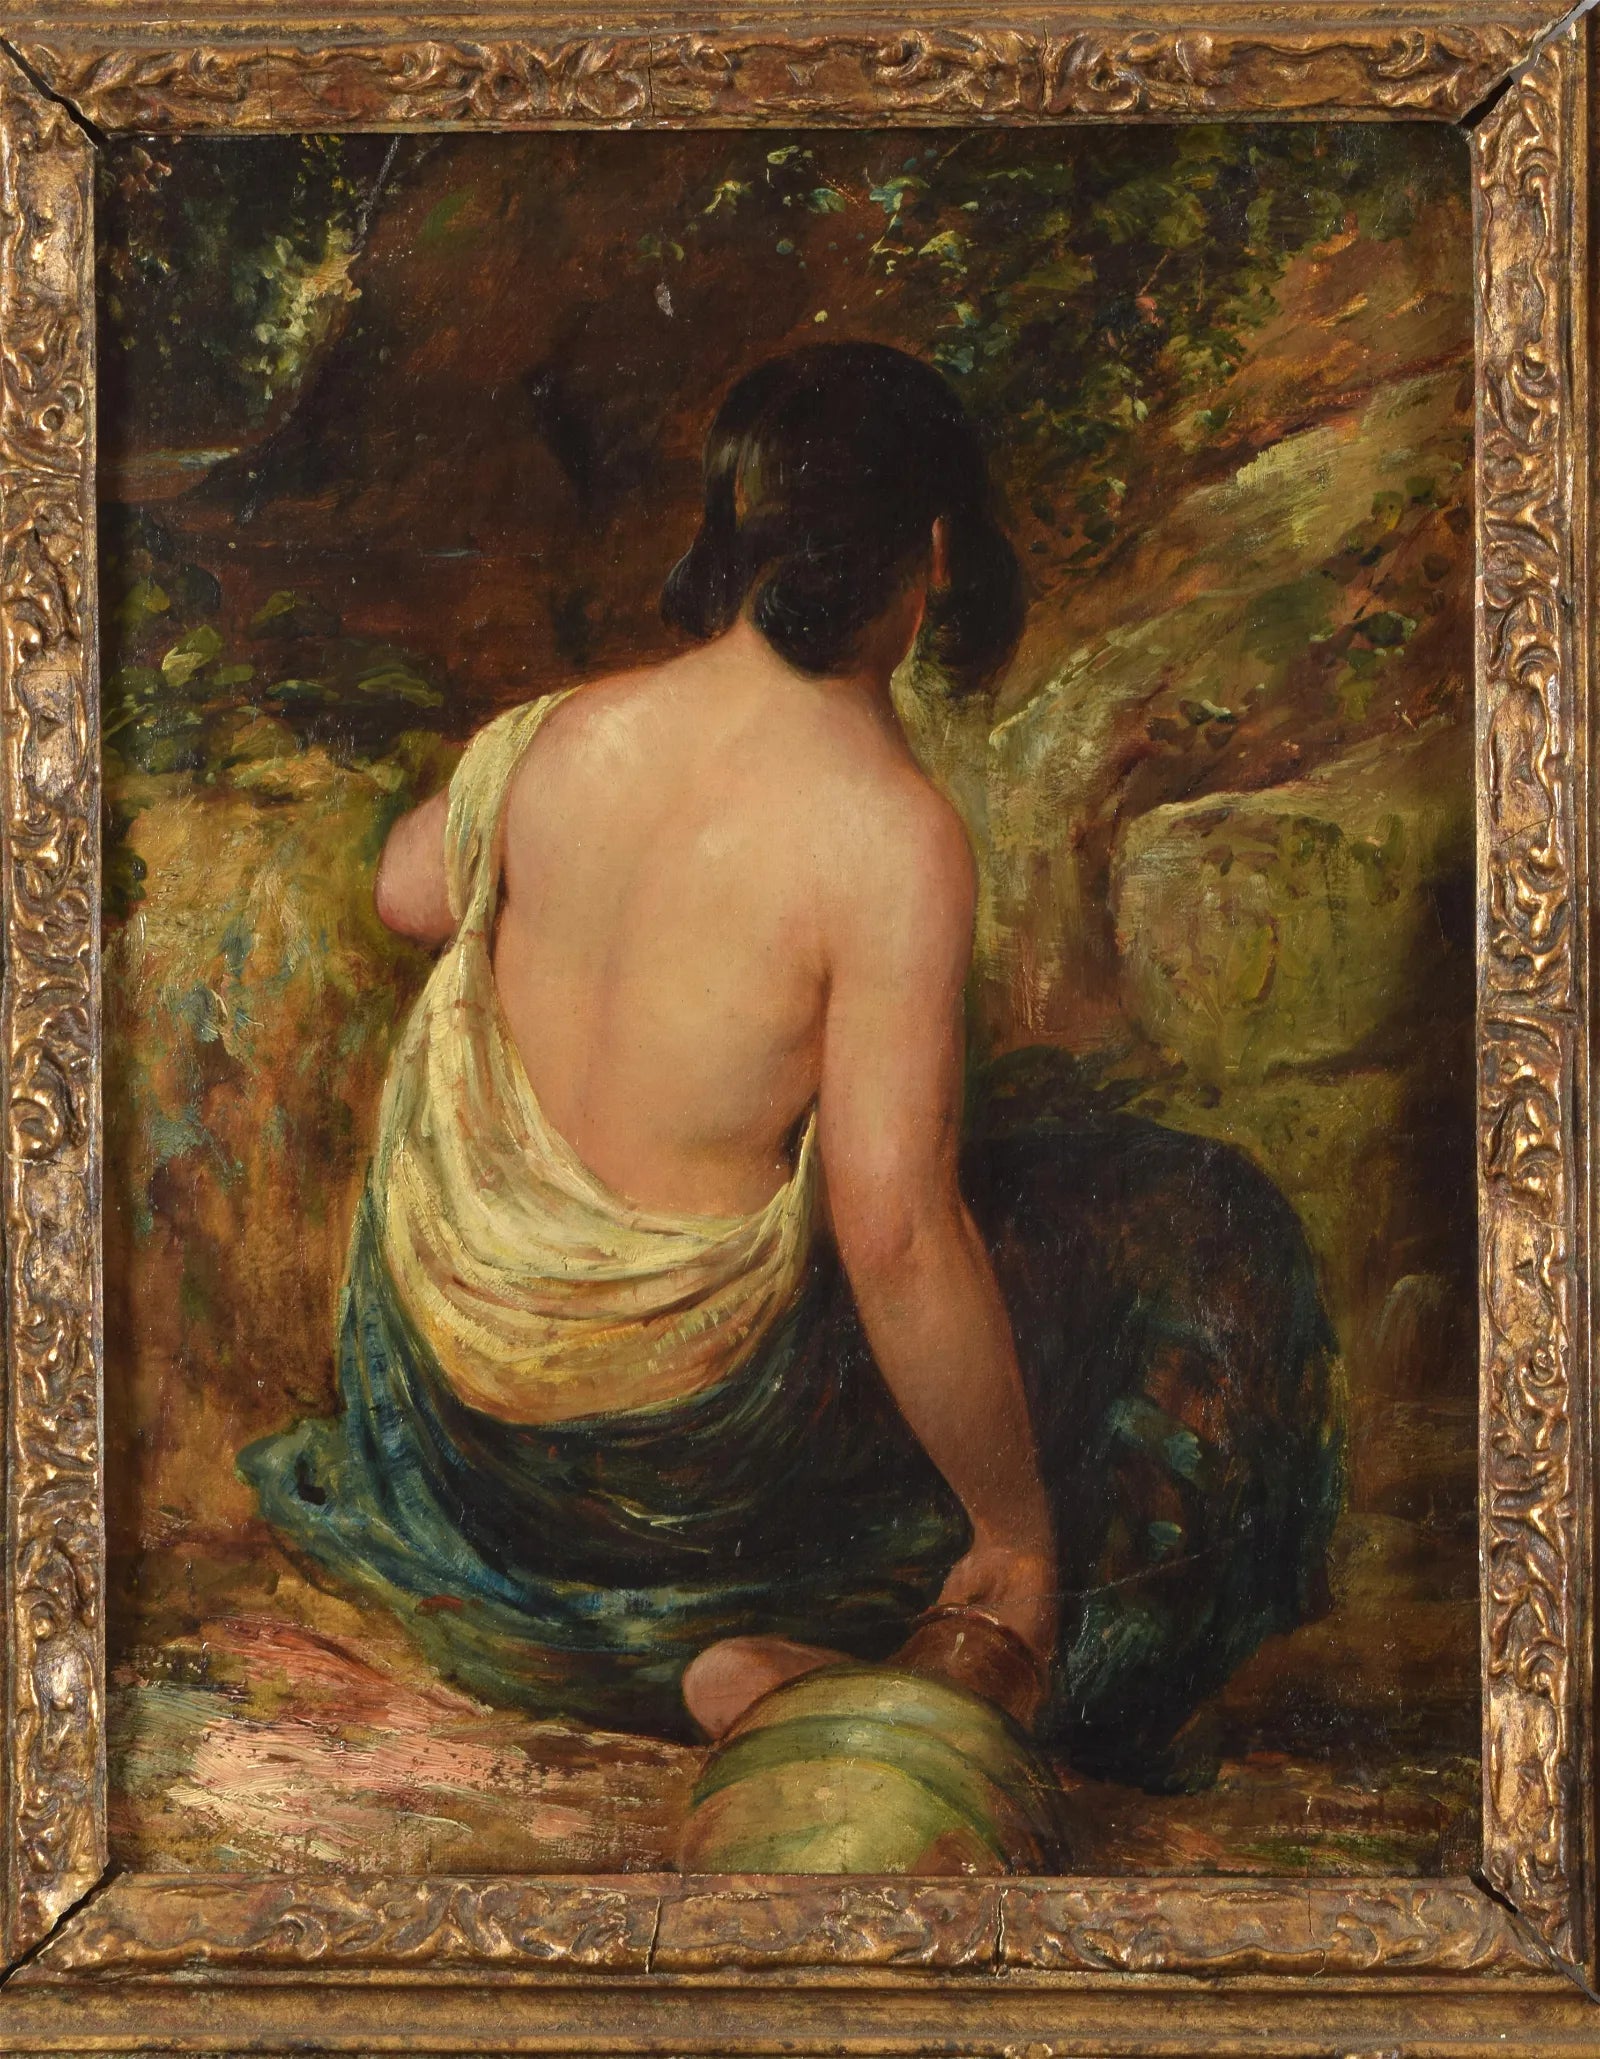 AW605: : Mid 19th C European School -Oil on Canvas - Genre Scene Woman at Well